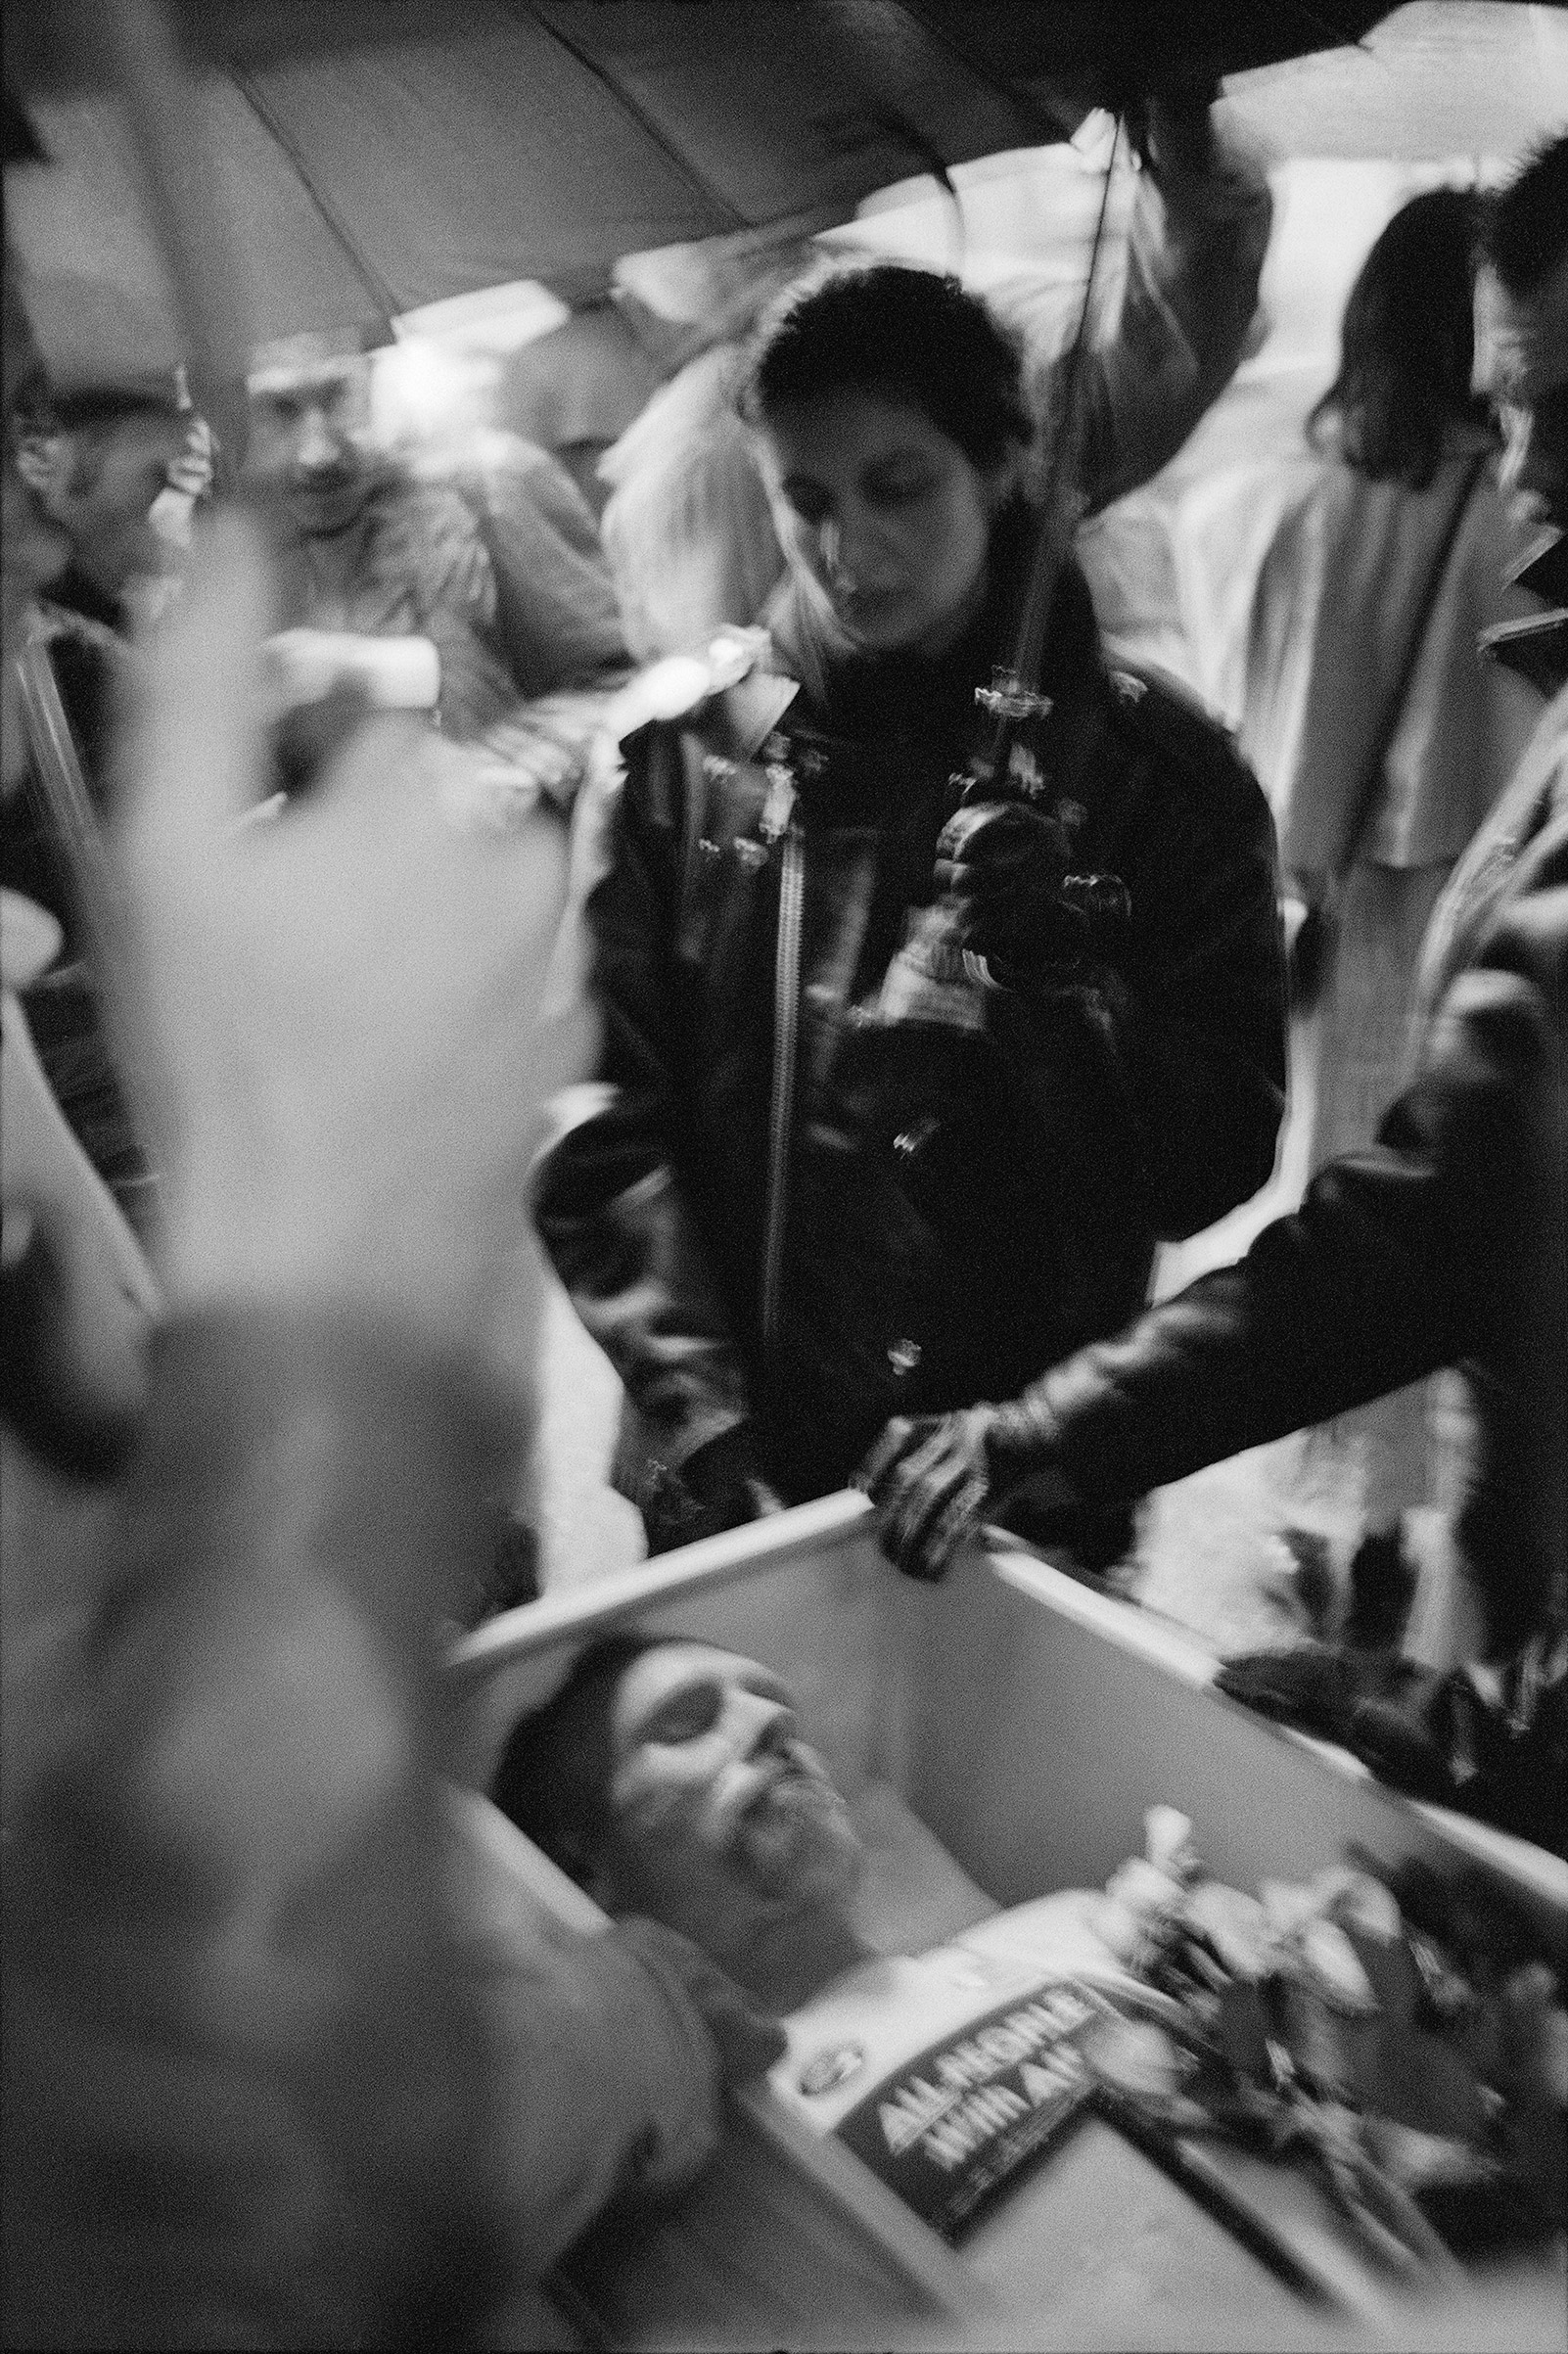 From the ACT UP funeral march carrying the body of Mark L. Fisher from Judson Memorial Church up Sixth Avenue to the Republican National Committee headquarters on the eve of the presidential election, 1992.